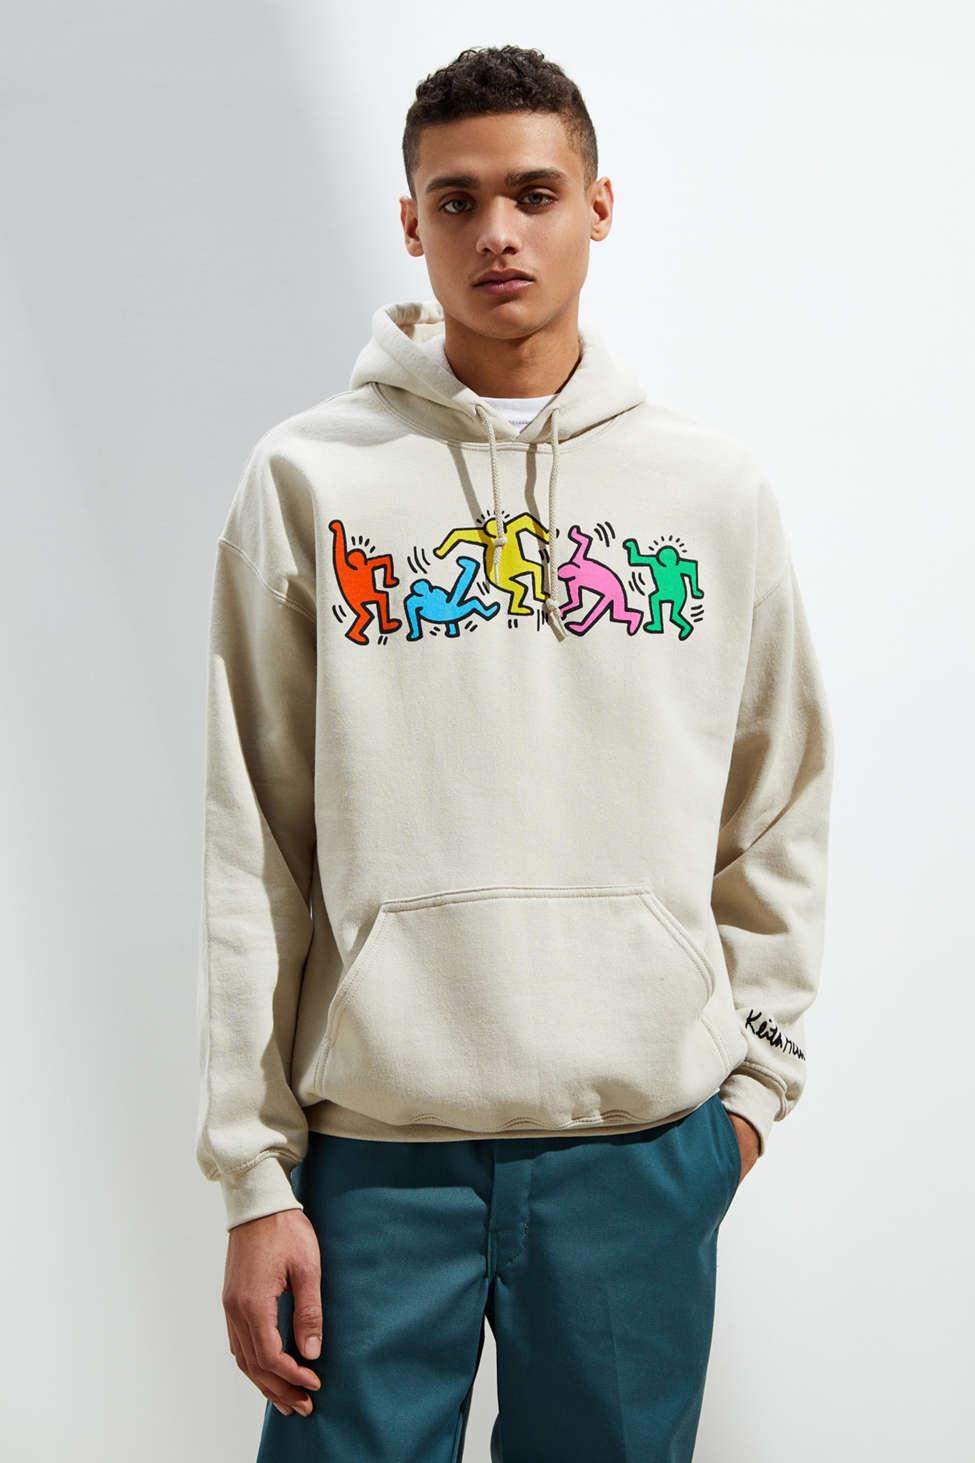 Urban Outfitters Cotton Keith Haring Hoodie Sweatshirt for Men - Lyst